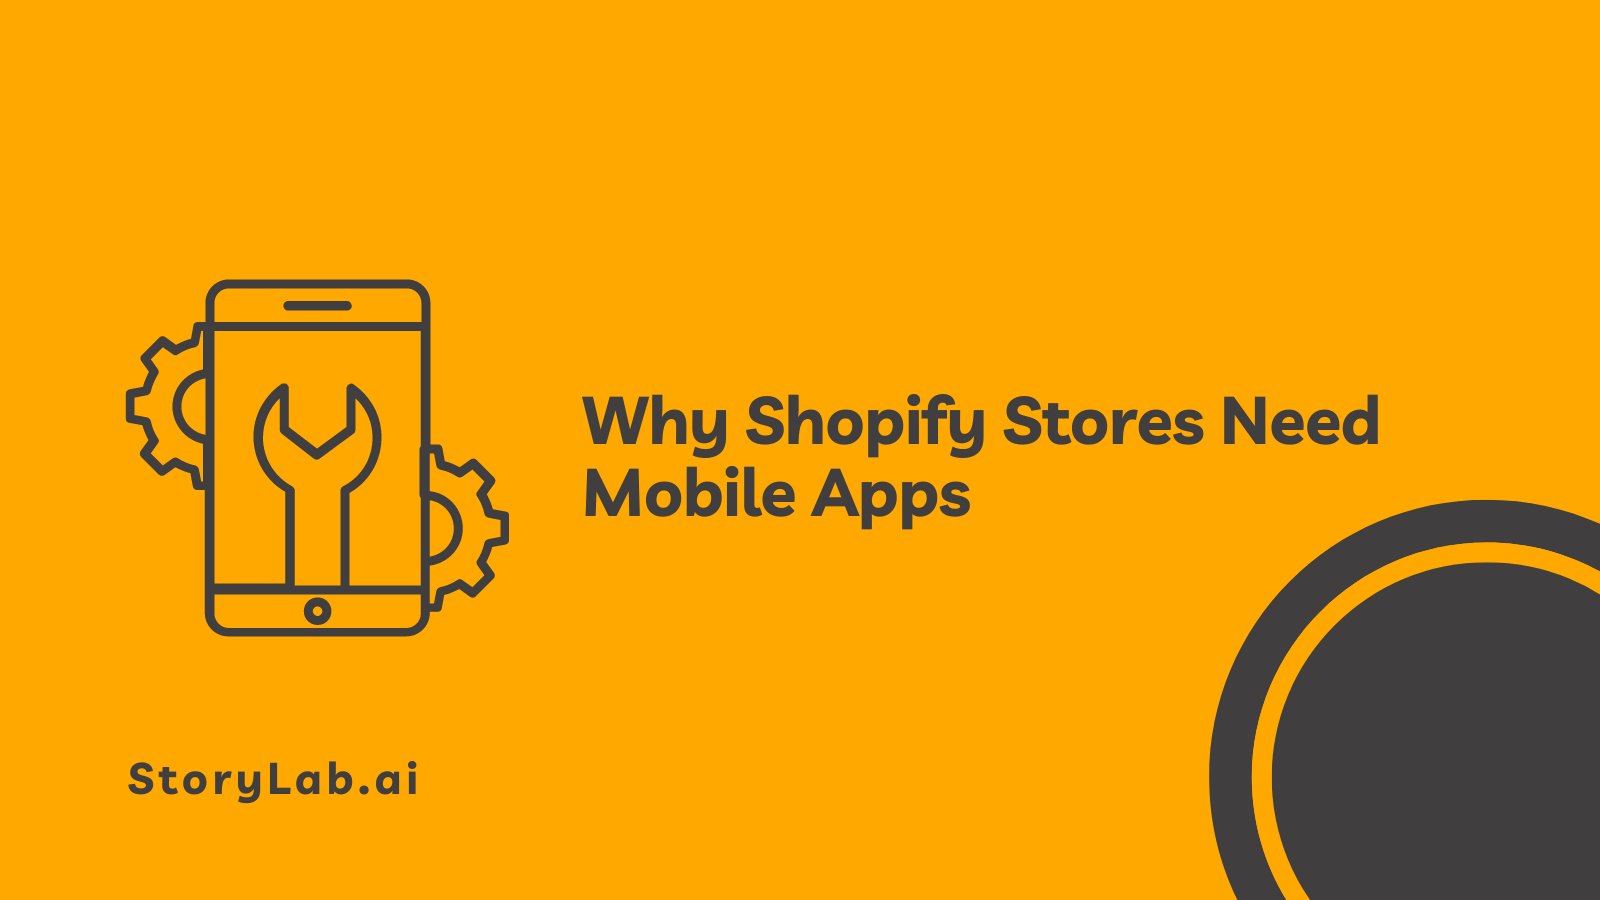 Why Shopify Stores Need Mobile Apps